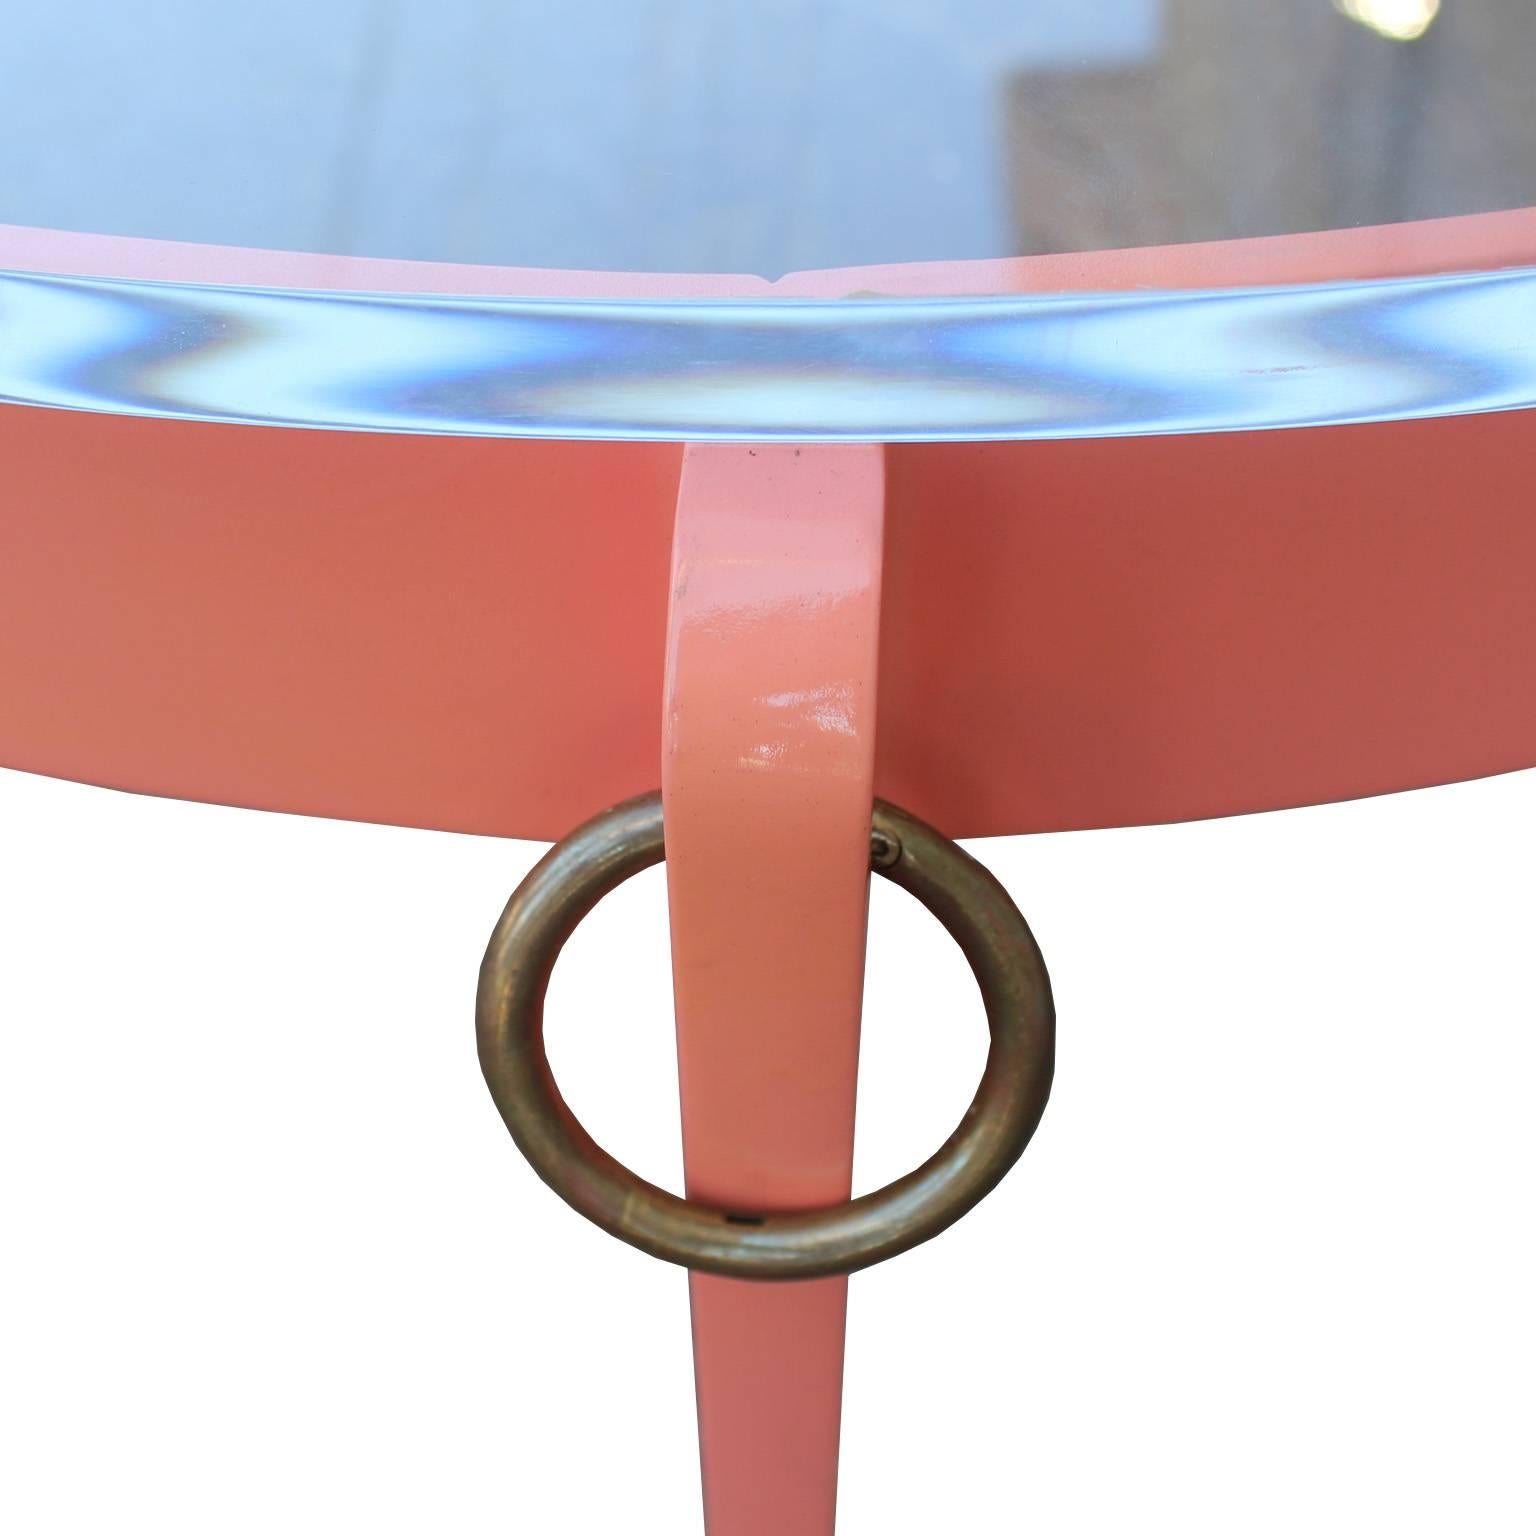 North American Round Coral Lacquer Modern Coffee Table Topped with Lucite Top and Brass Rings